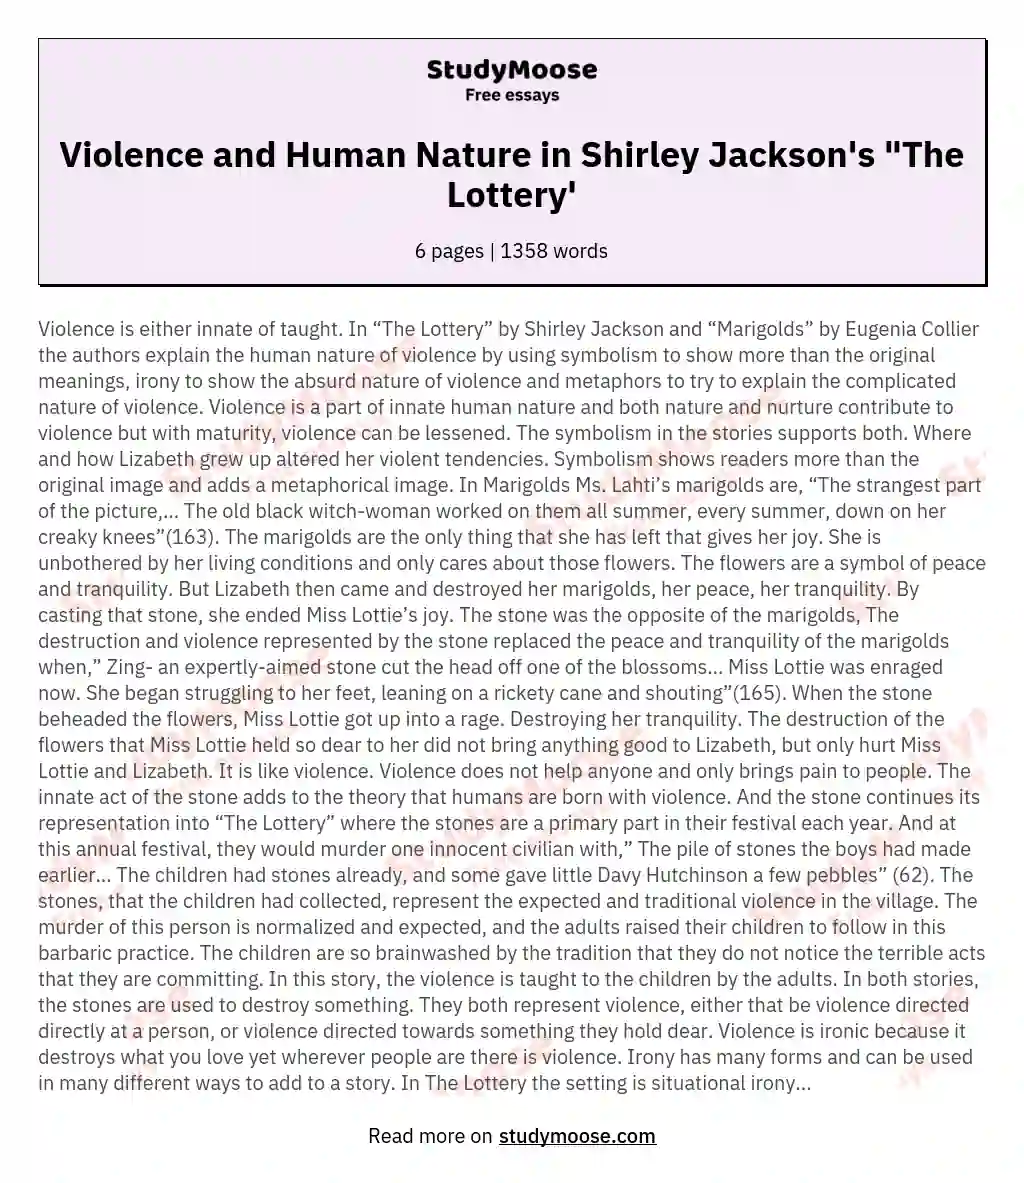 Violence and Human Nature in Shirley Jackson's "The Lottery'